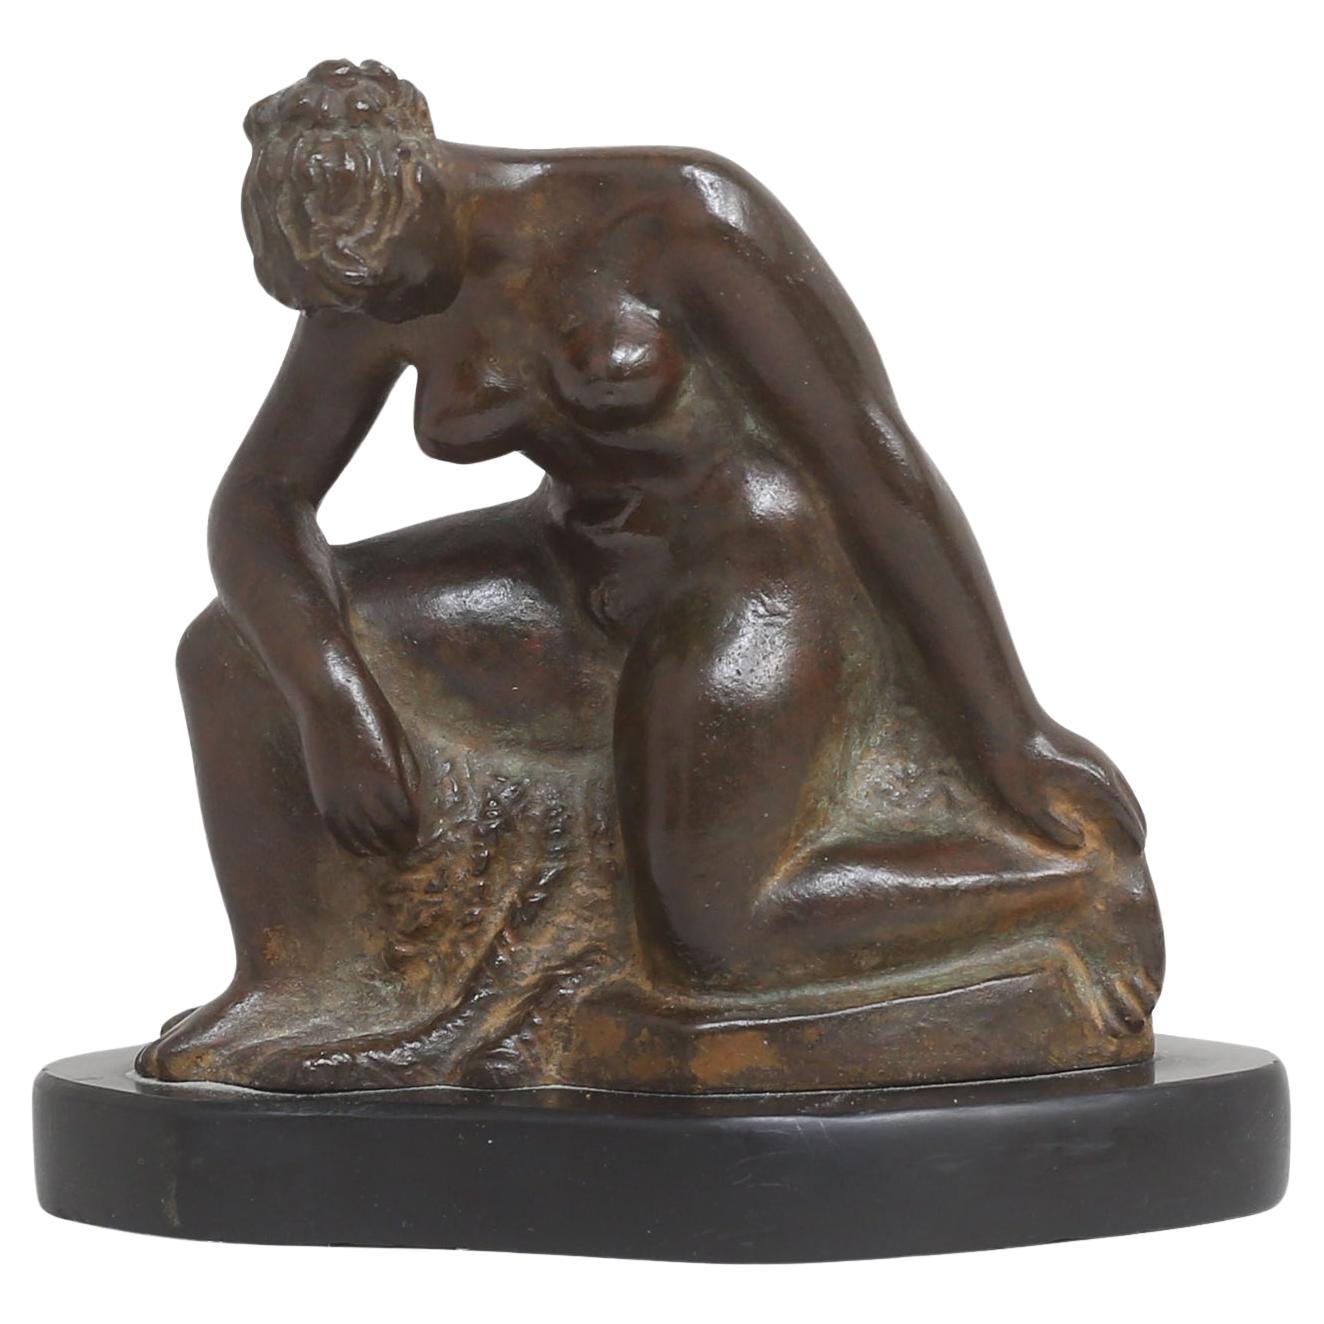 Stamped by the Swedish artist Torolf Engström. Executed in bronze, number 1 out of 10 editions. Casting by E. Pettersson FUD.

The Swedish Modern Nude Sculpture 